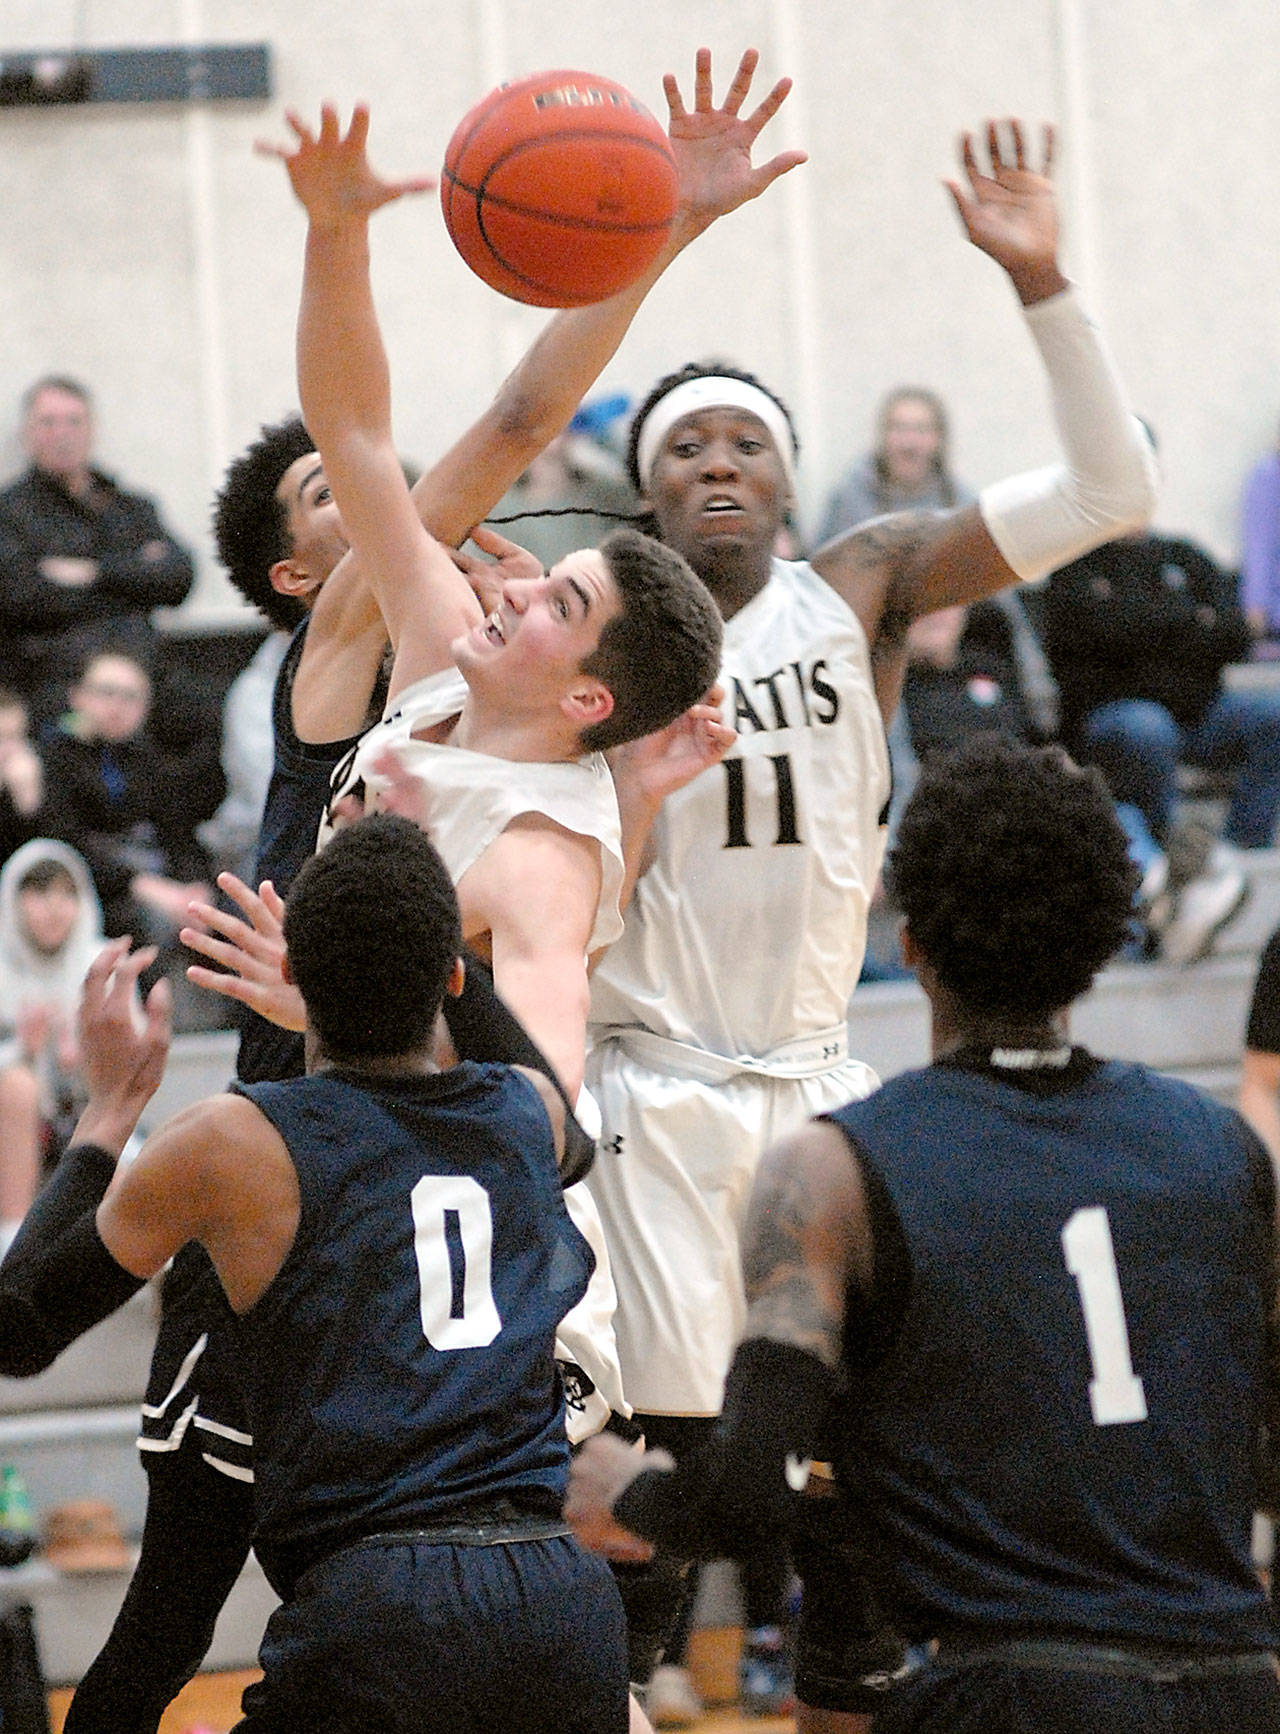 Peninsula’s Nate DeSpain, center left, and Malik Moore, center right, fight for a rebound surrounded by Bellevue defenders Trey Lawrence, back, Trevon Richmond, front left, and Tijohn Rodde, front right, on Wednesday night at Peninsula College in Port Angeles. (Keith Thorpe/Peninsula Daily News)